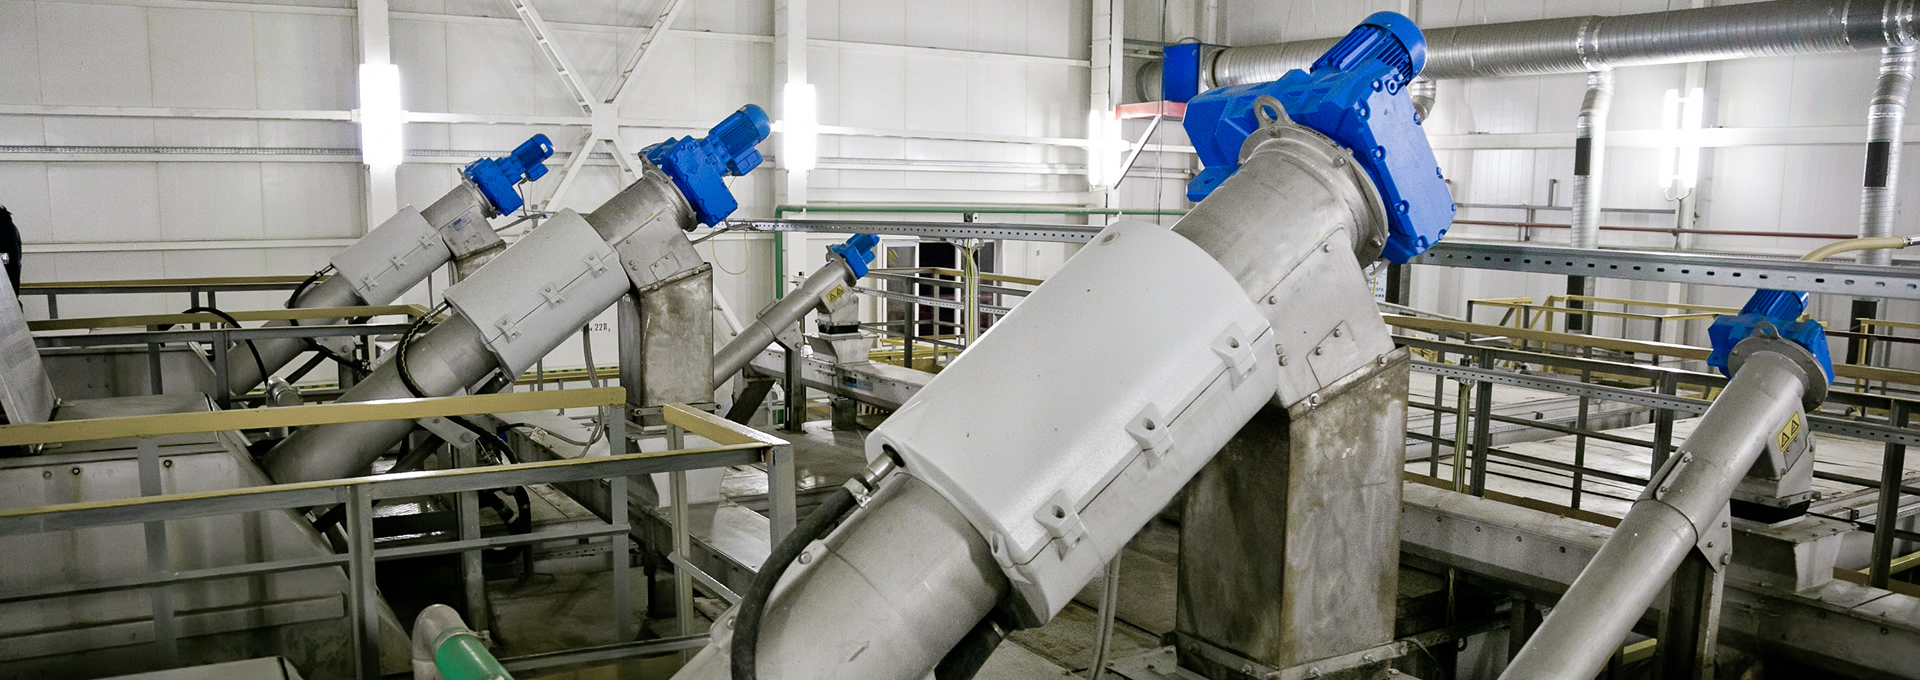 Centrifugal system automated for the treatment of oily water